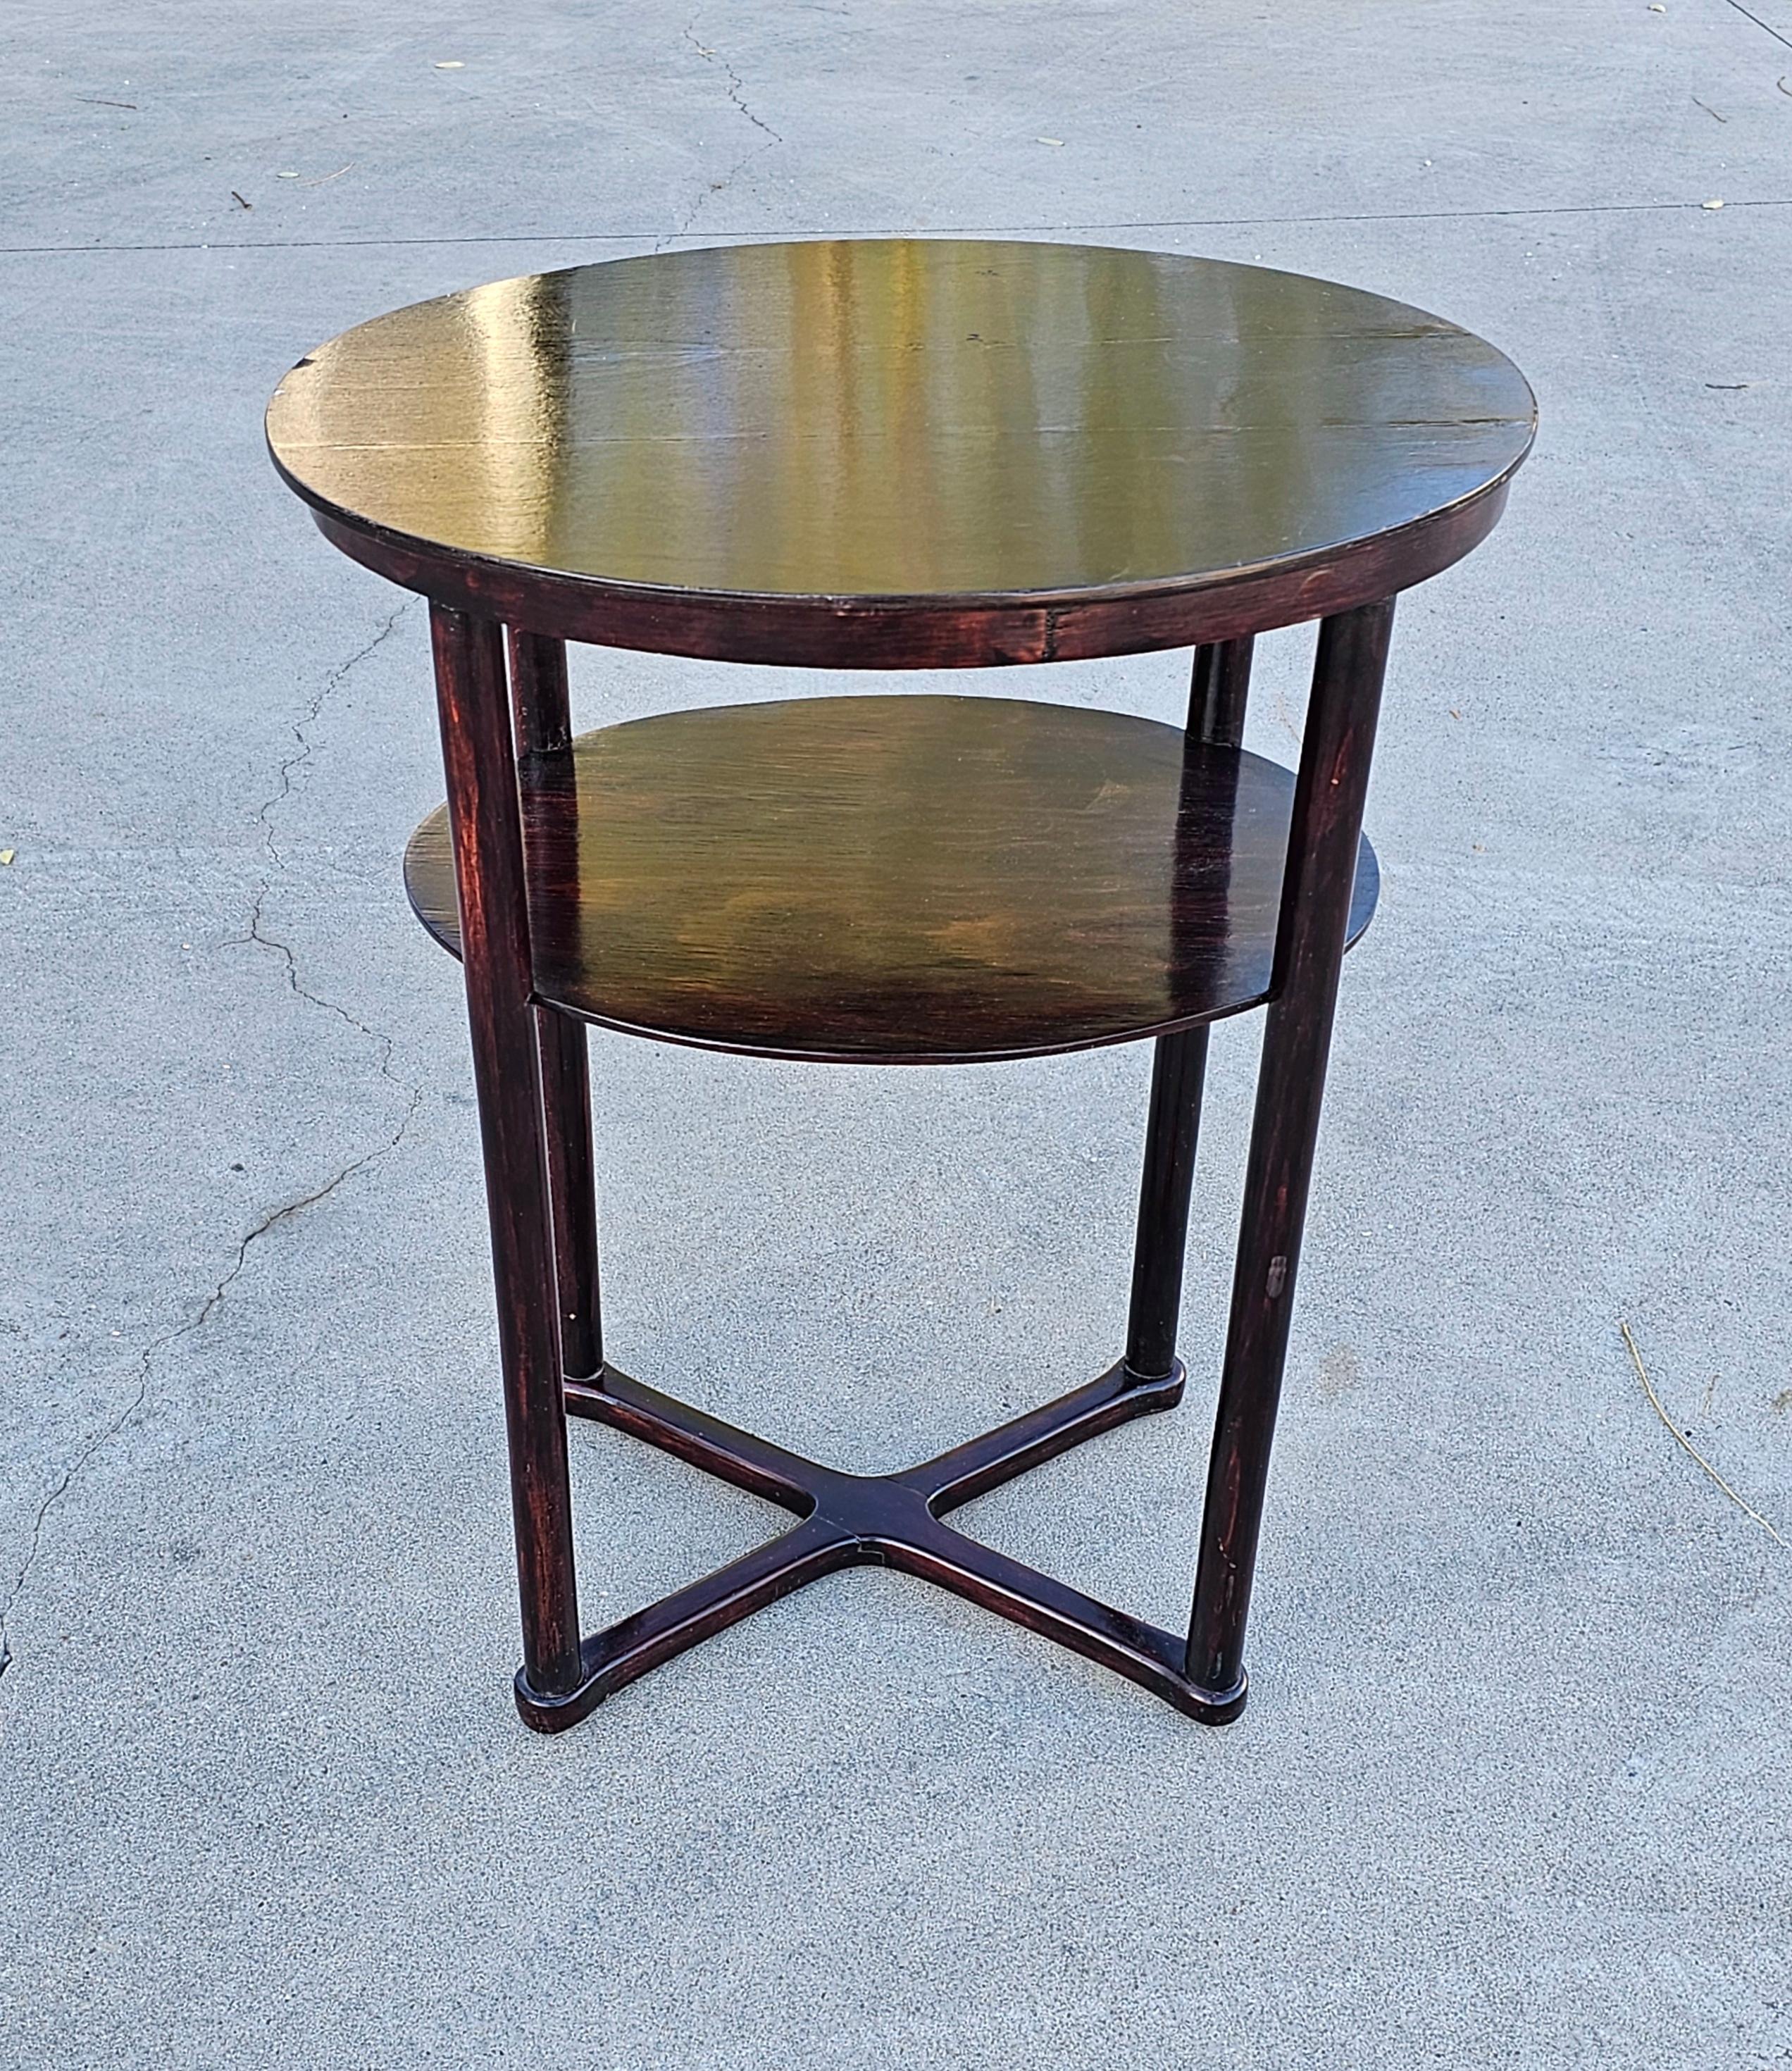 Vienna Secession Oval Side Table Model 960/2 designed by Josef Hoffmann, 1910s In Fair Condition For Sale In Beograd, RS